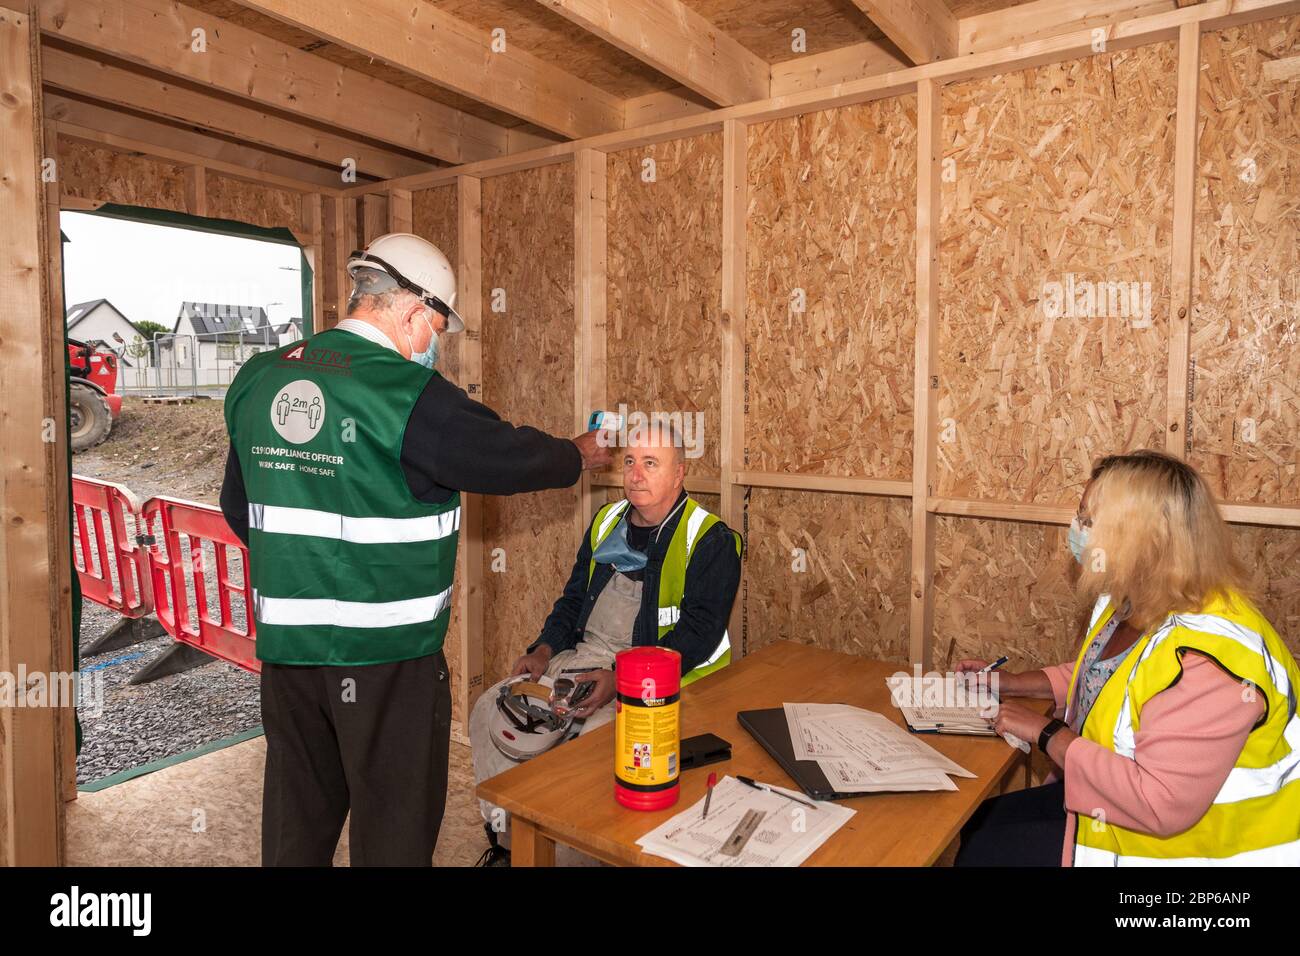 Carrigaline, Cork, Ireland. 18th May, 2020.On the first day of phase one with the easing of Covid-19 restrictions Safety Officer Michael O'Sullivan checks the temperture of one of the workers assisted by Caroline O'Keffee at the Astra construction site in Janeville, Carrigaline, Co. Cork, Ireland. - Credit; David Creedon / Alamy Live News Stock Photo